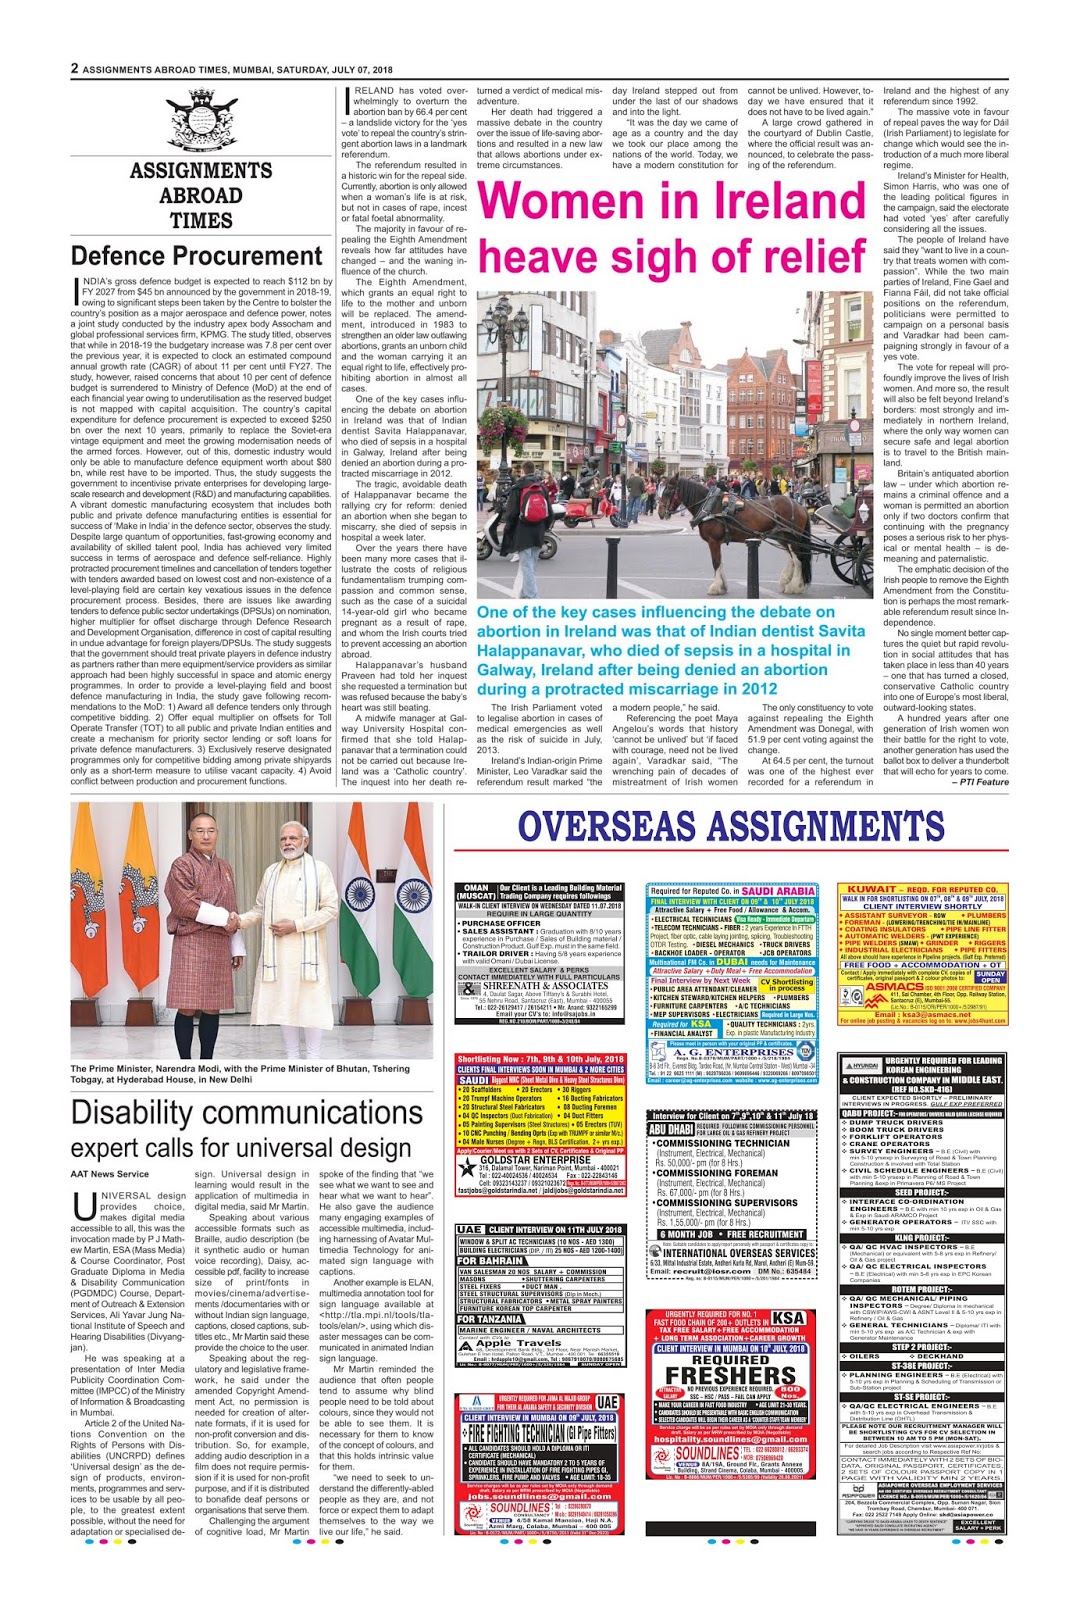 assignment abroad latest newspaper